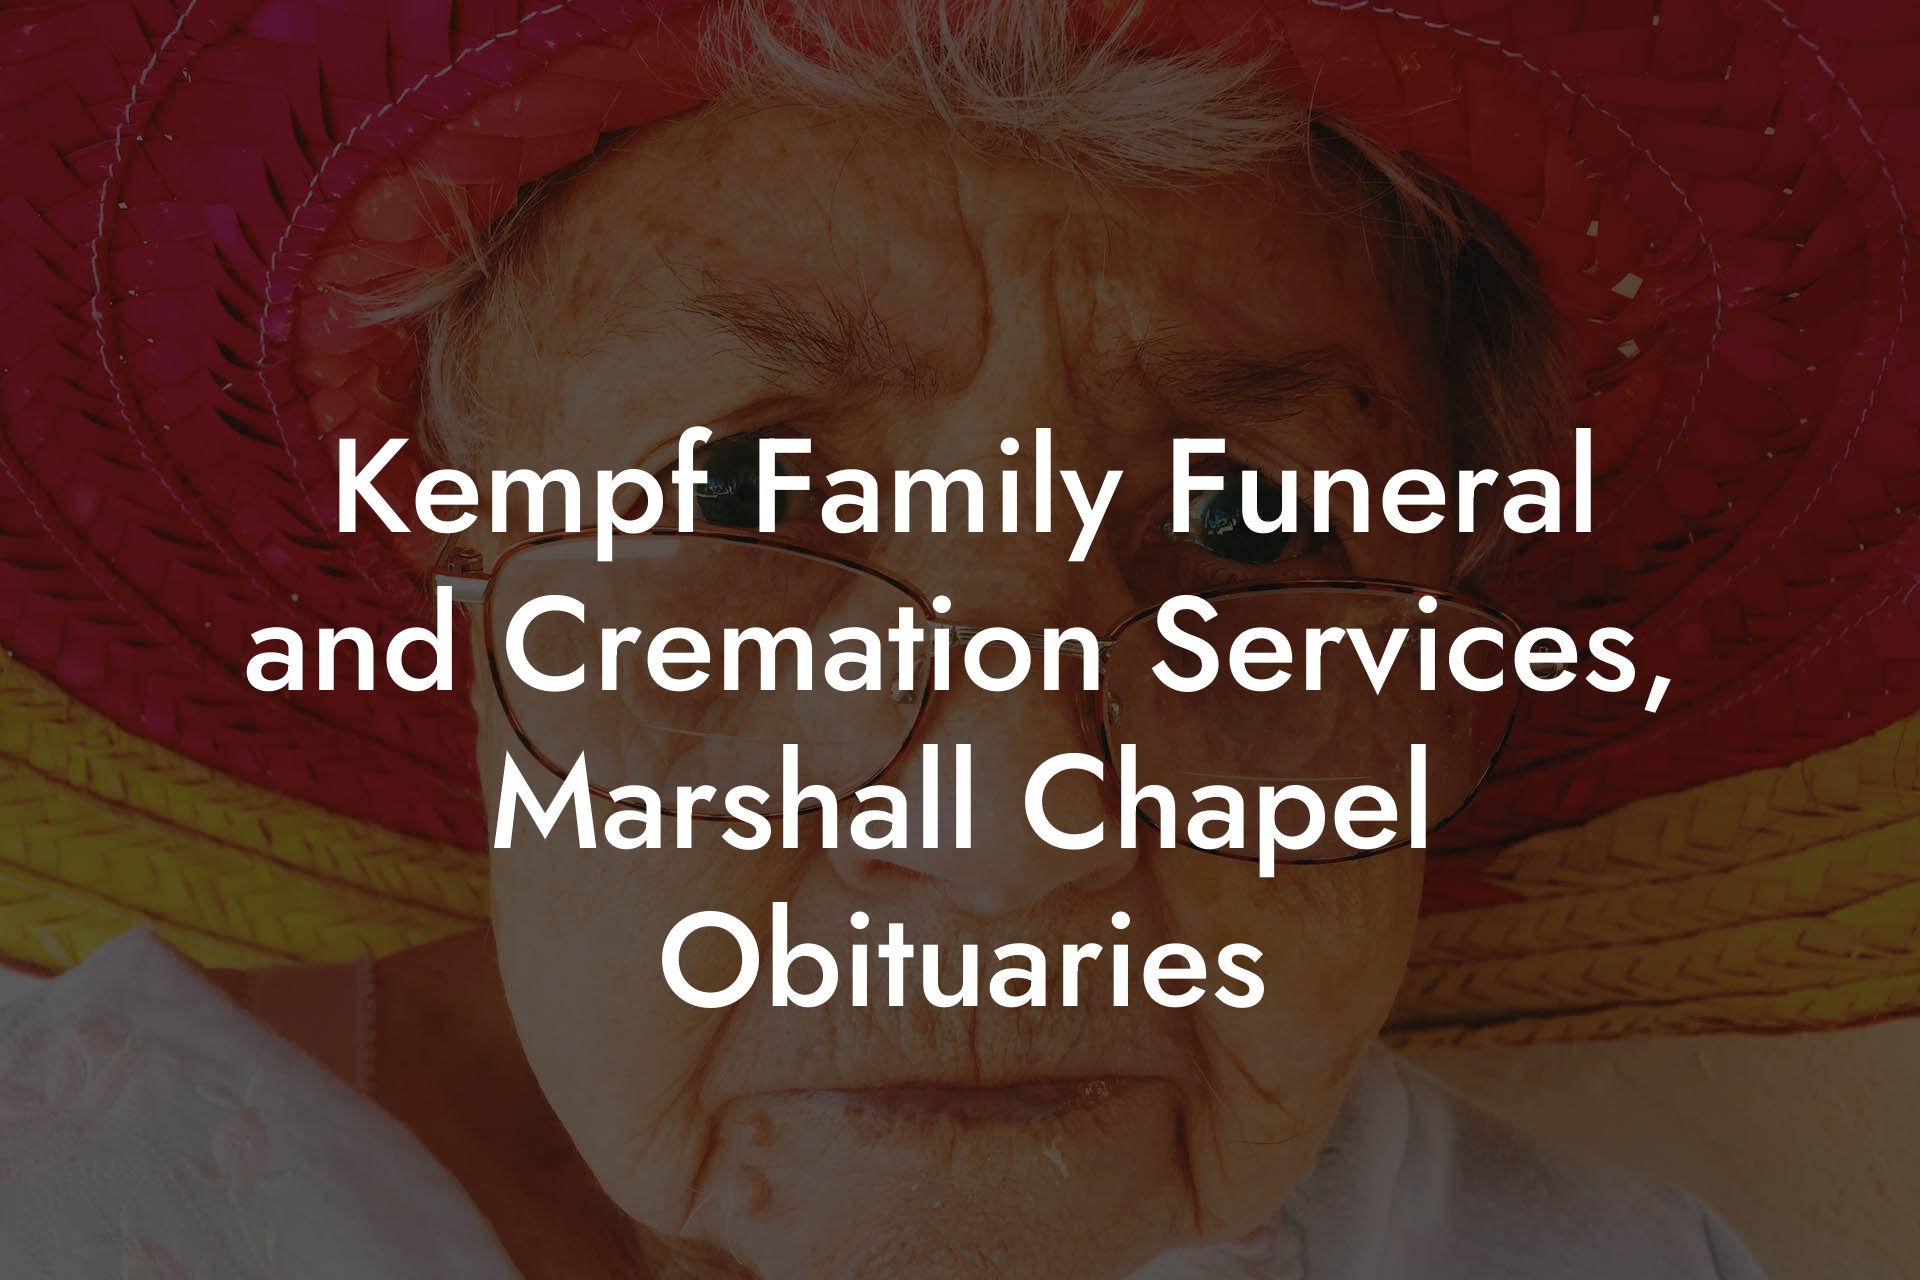 Kempf Family Funeral and Cremation Services, Marshall Chapel Obituaries